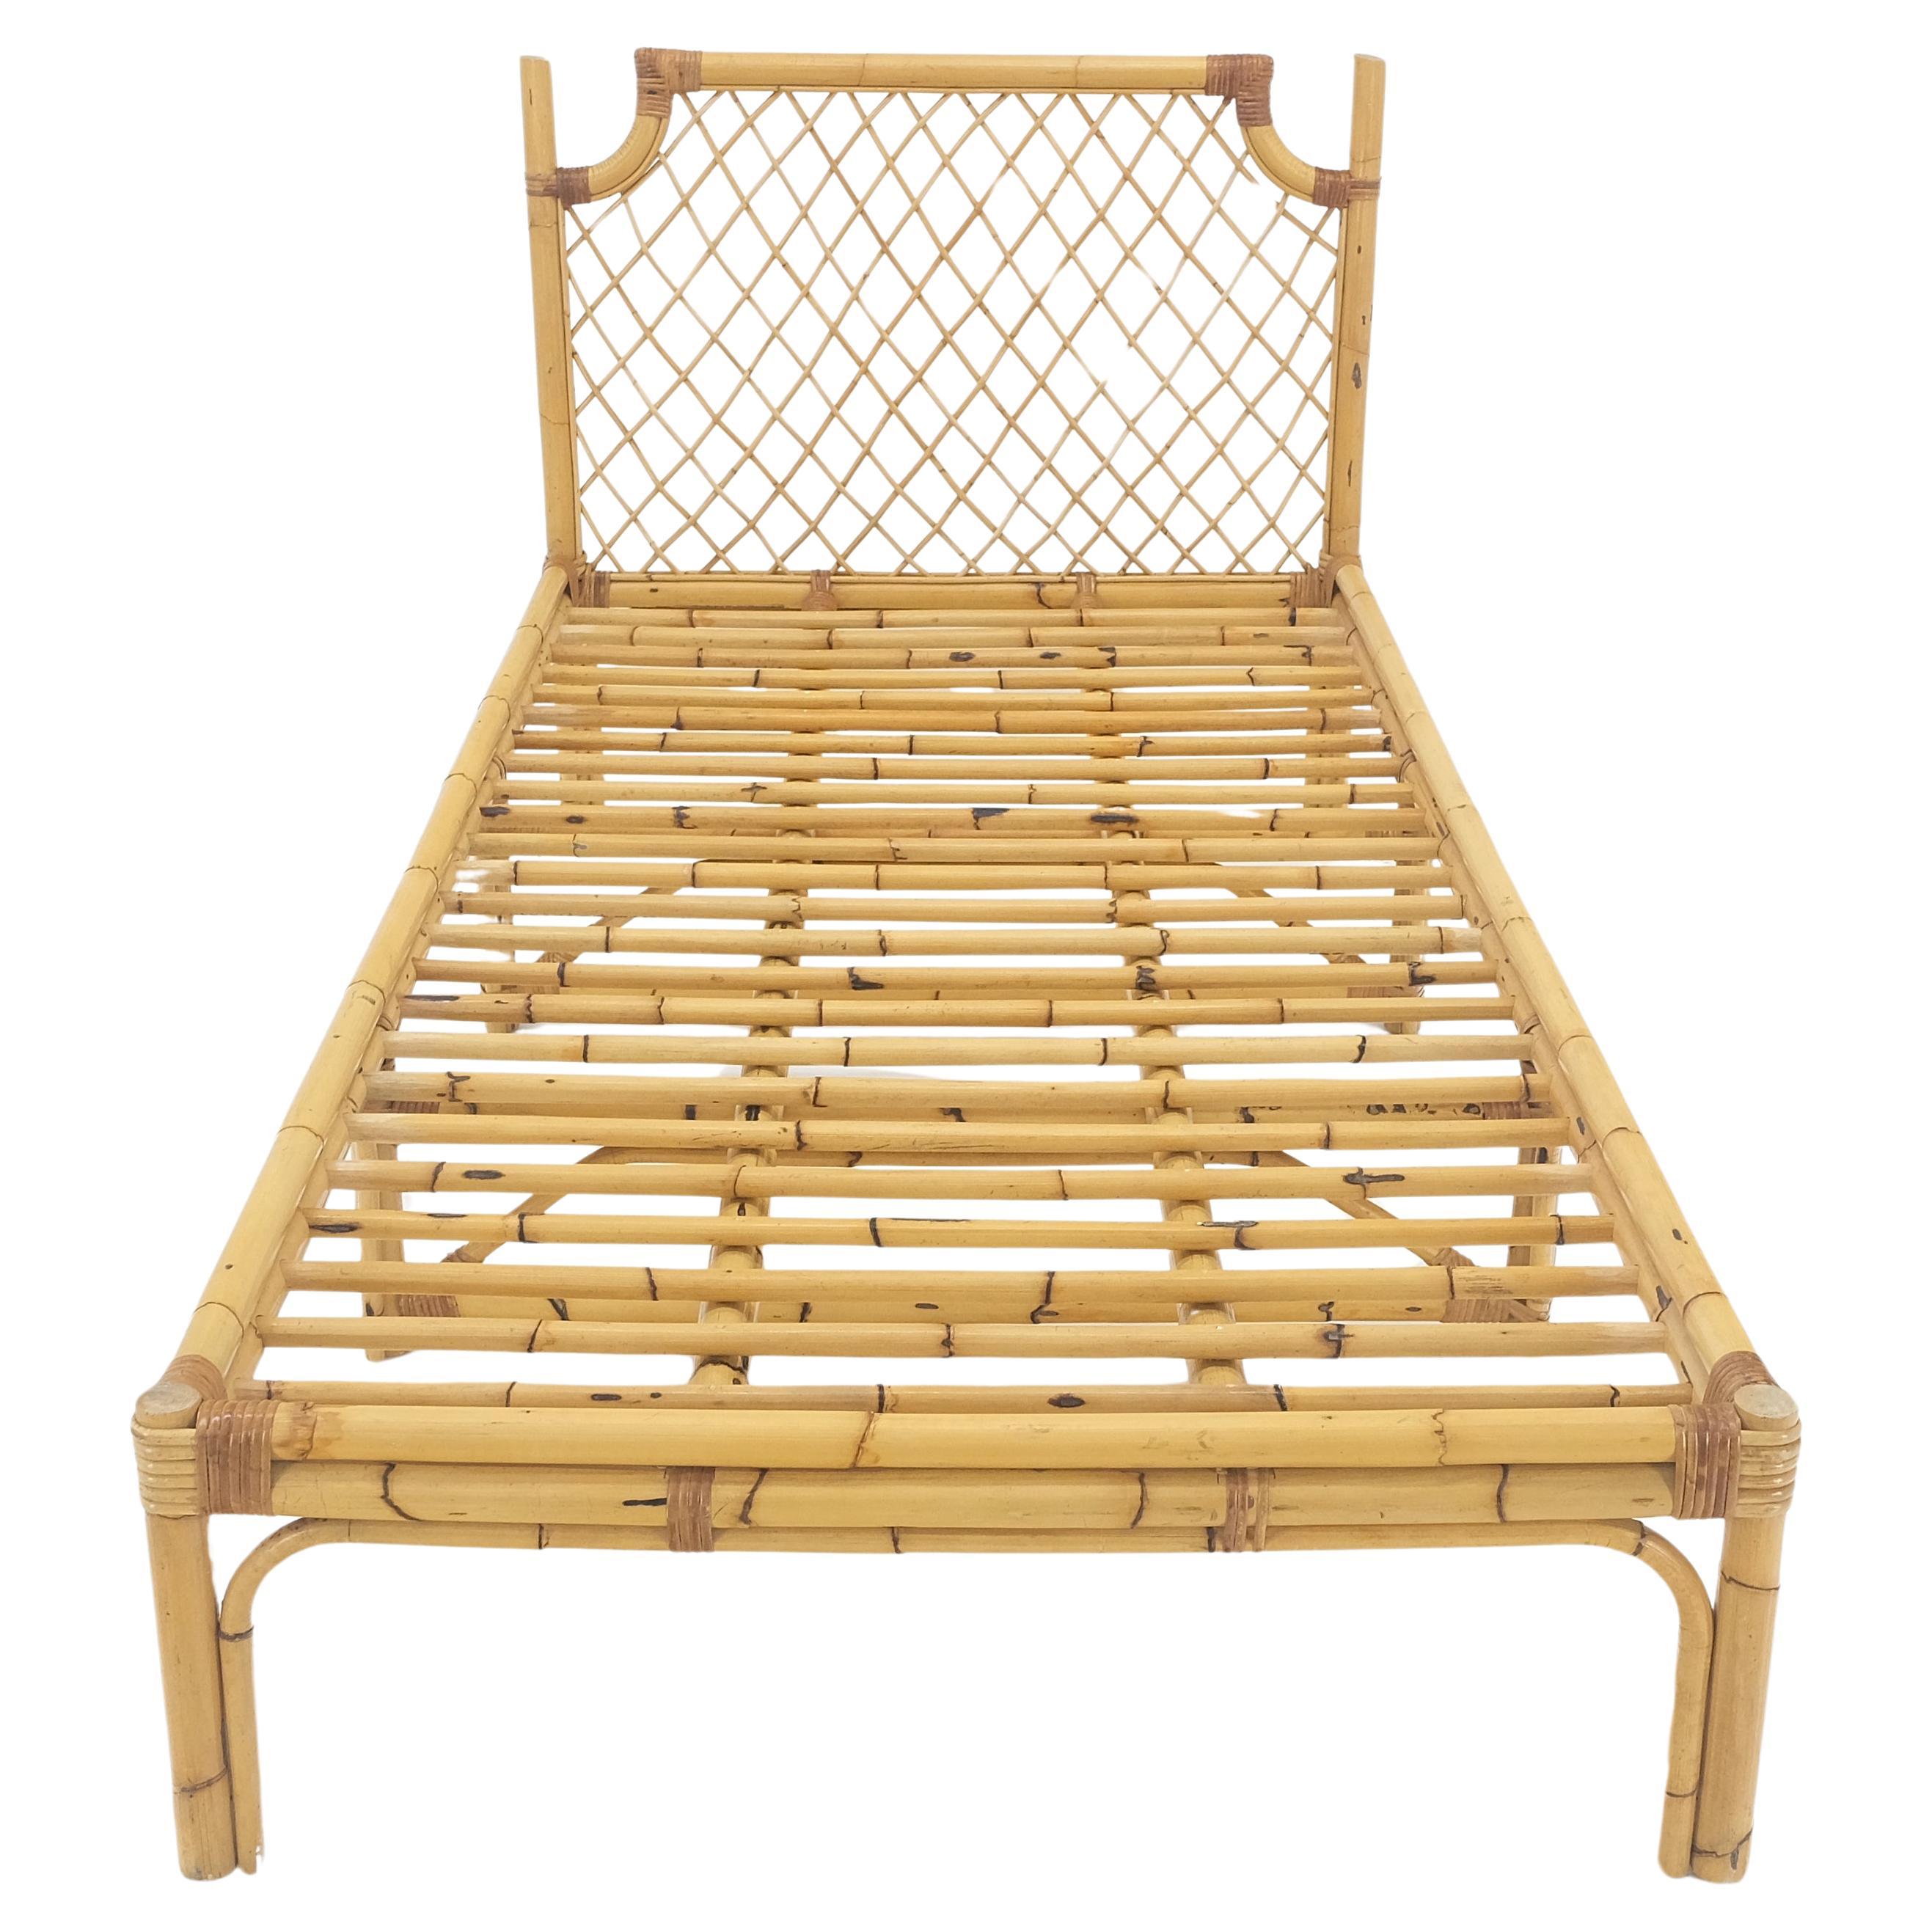 Unknown Vintage 1970s Large Bamboo Chaise Lounge Daybed Frame MINT! For Sale